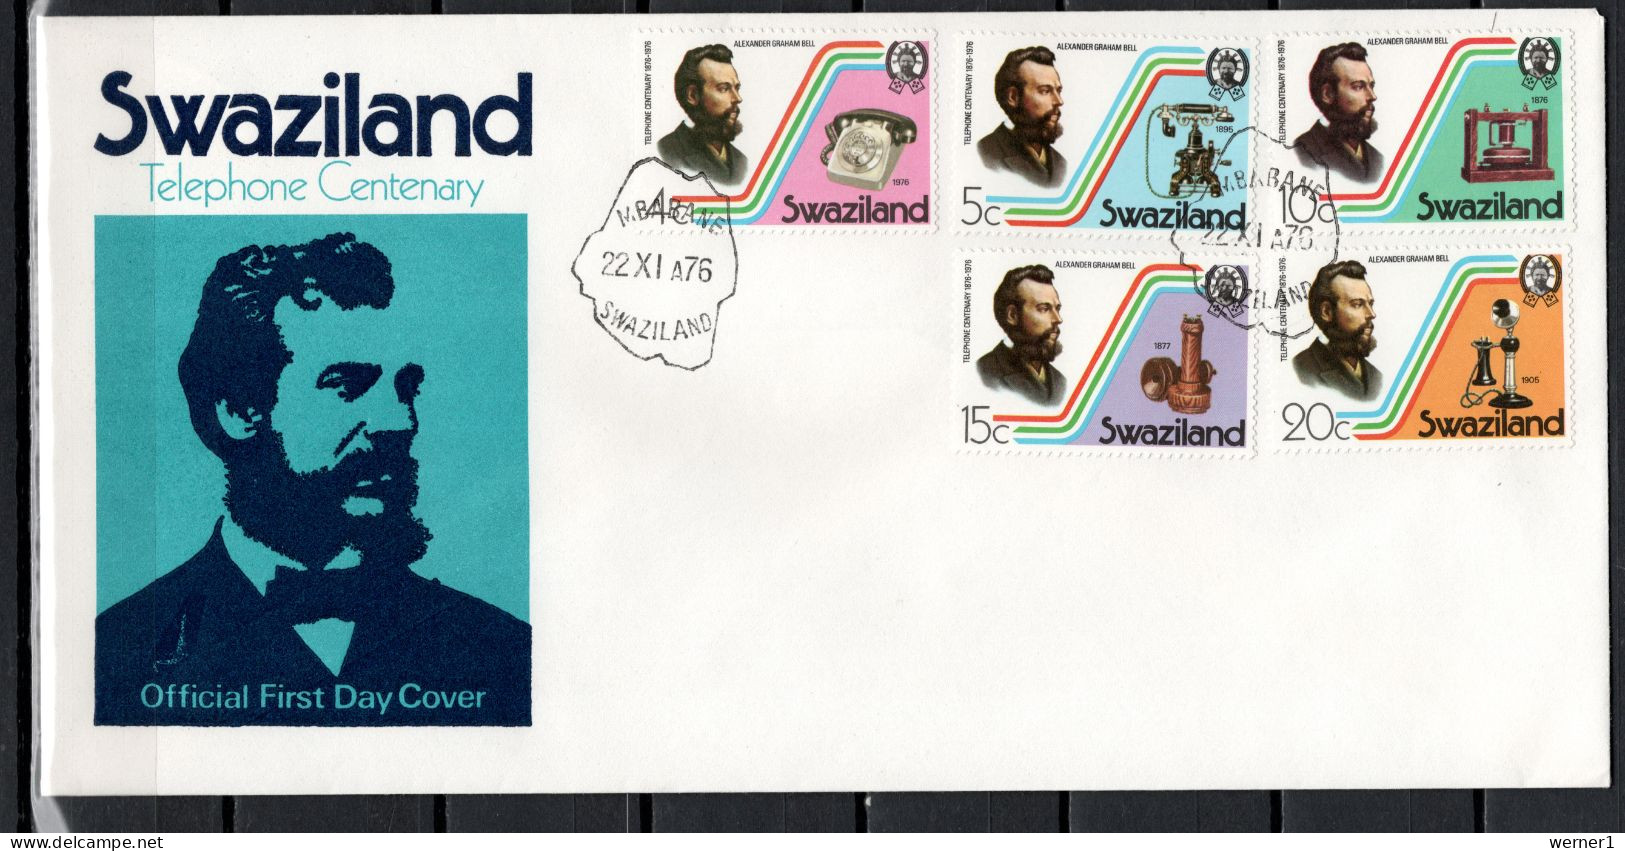 Swaziland 1976 Space, Telephone Centenary Set Of 5 On FDC - Africa